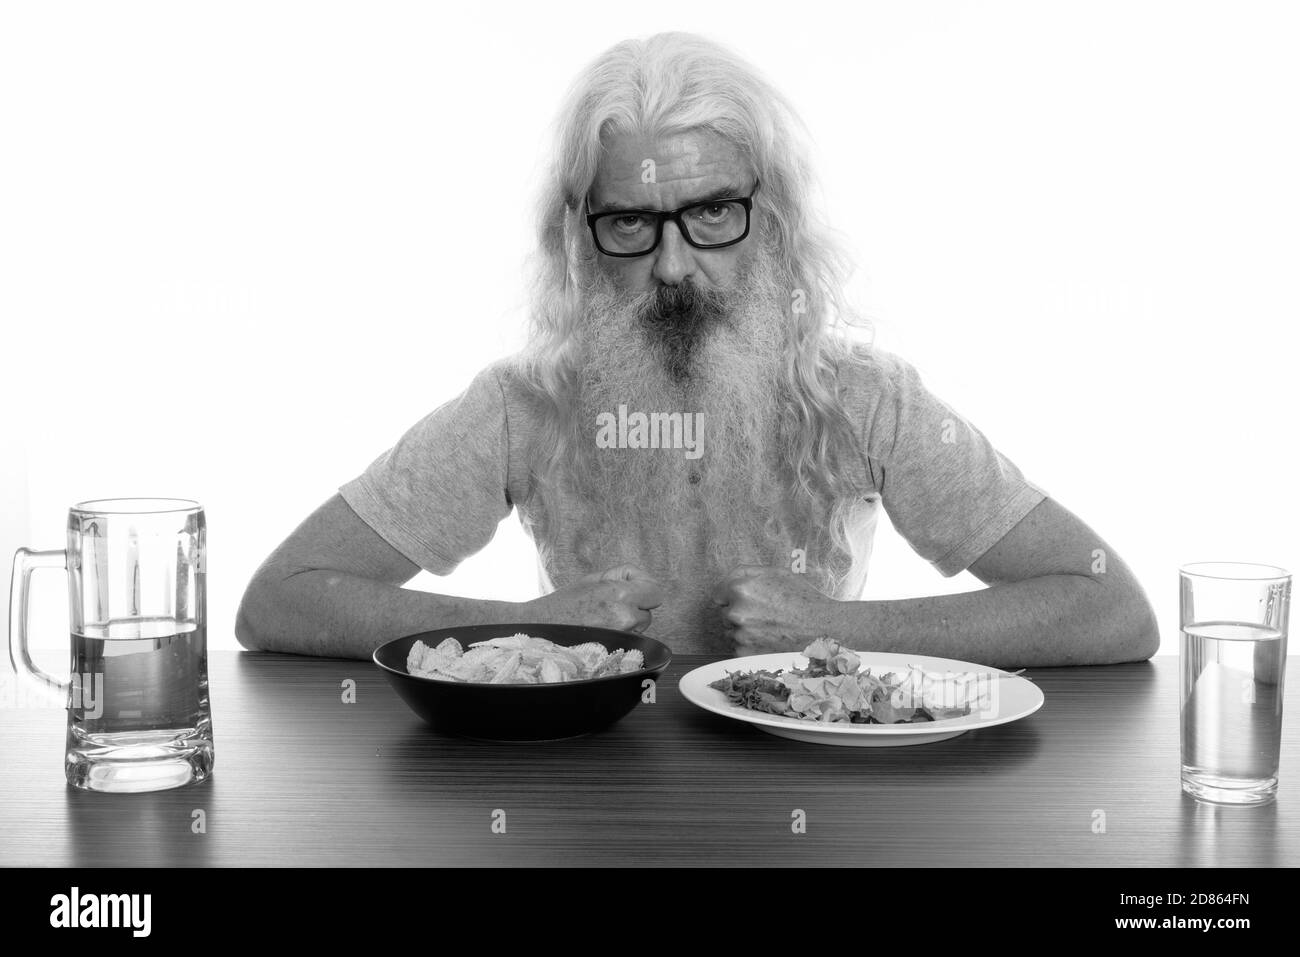 Studio shot of senior bearded man wearing eyeglasses with healthy and unhealthy foods on wooden table Stock Photo